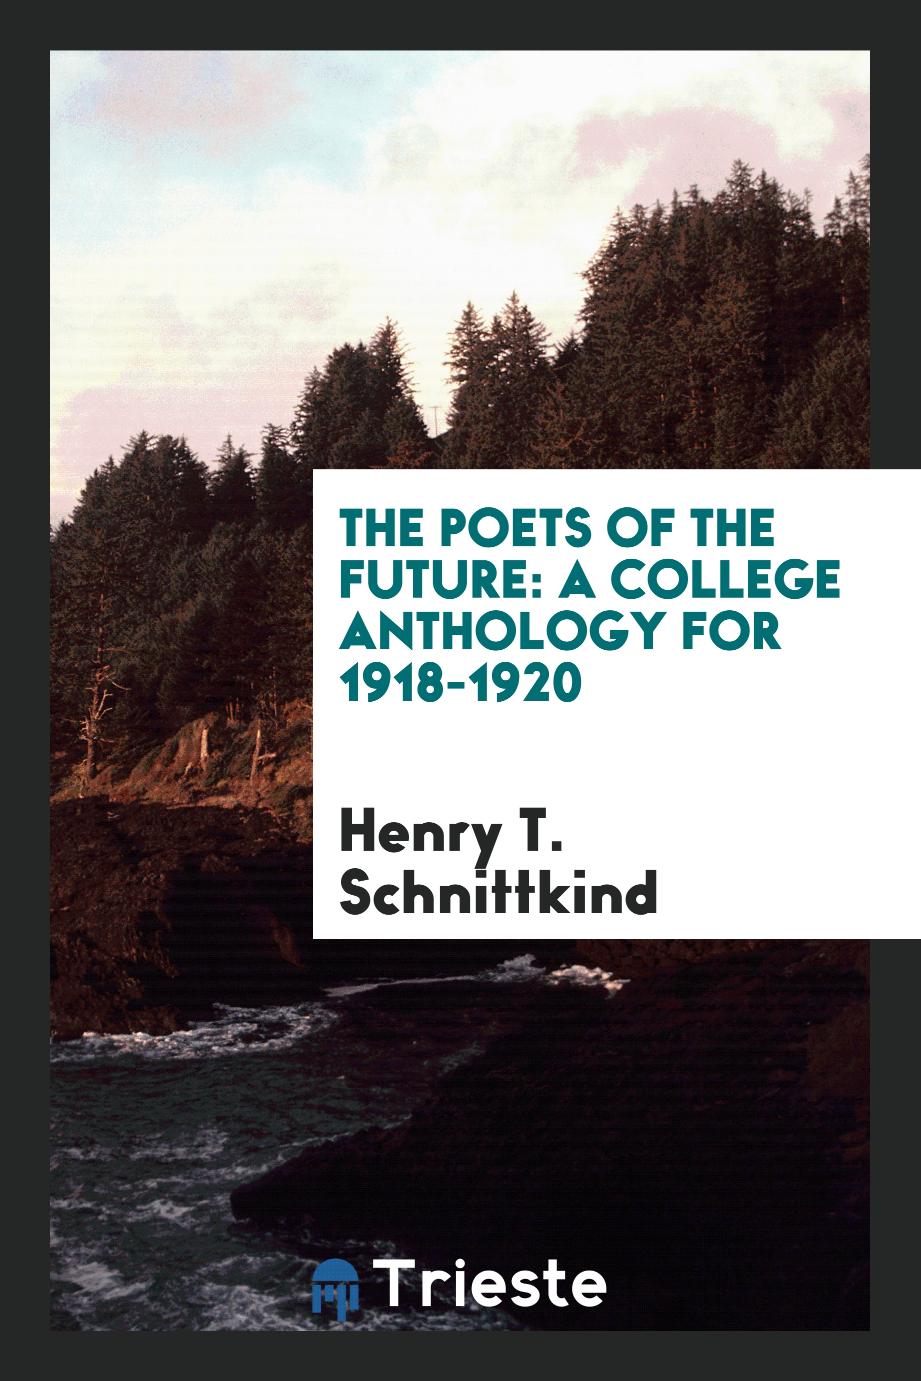 The Poets of the Future: A College Anthology for 1918-1920